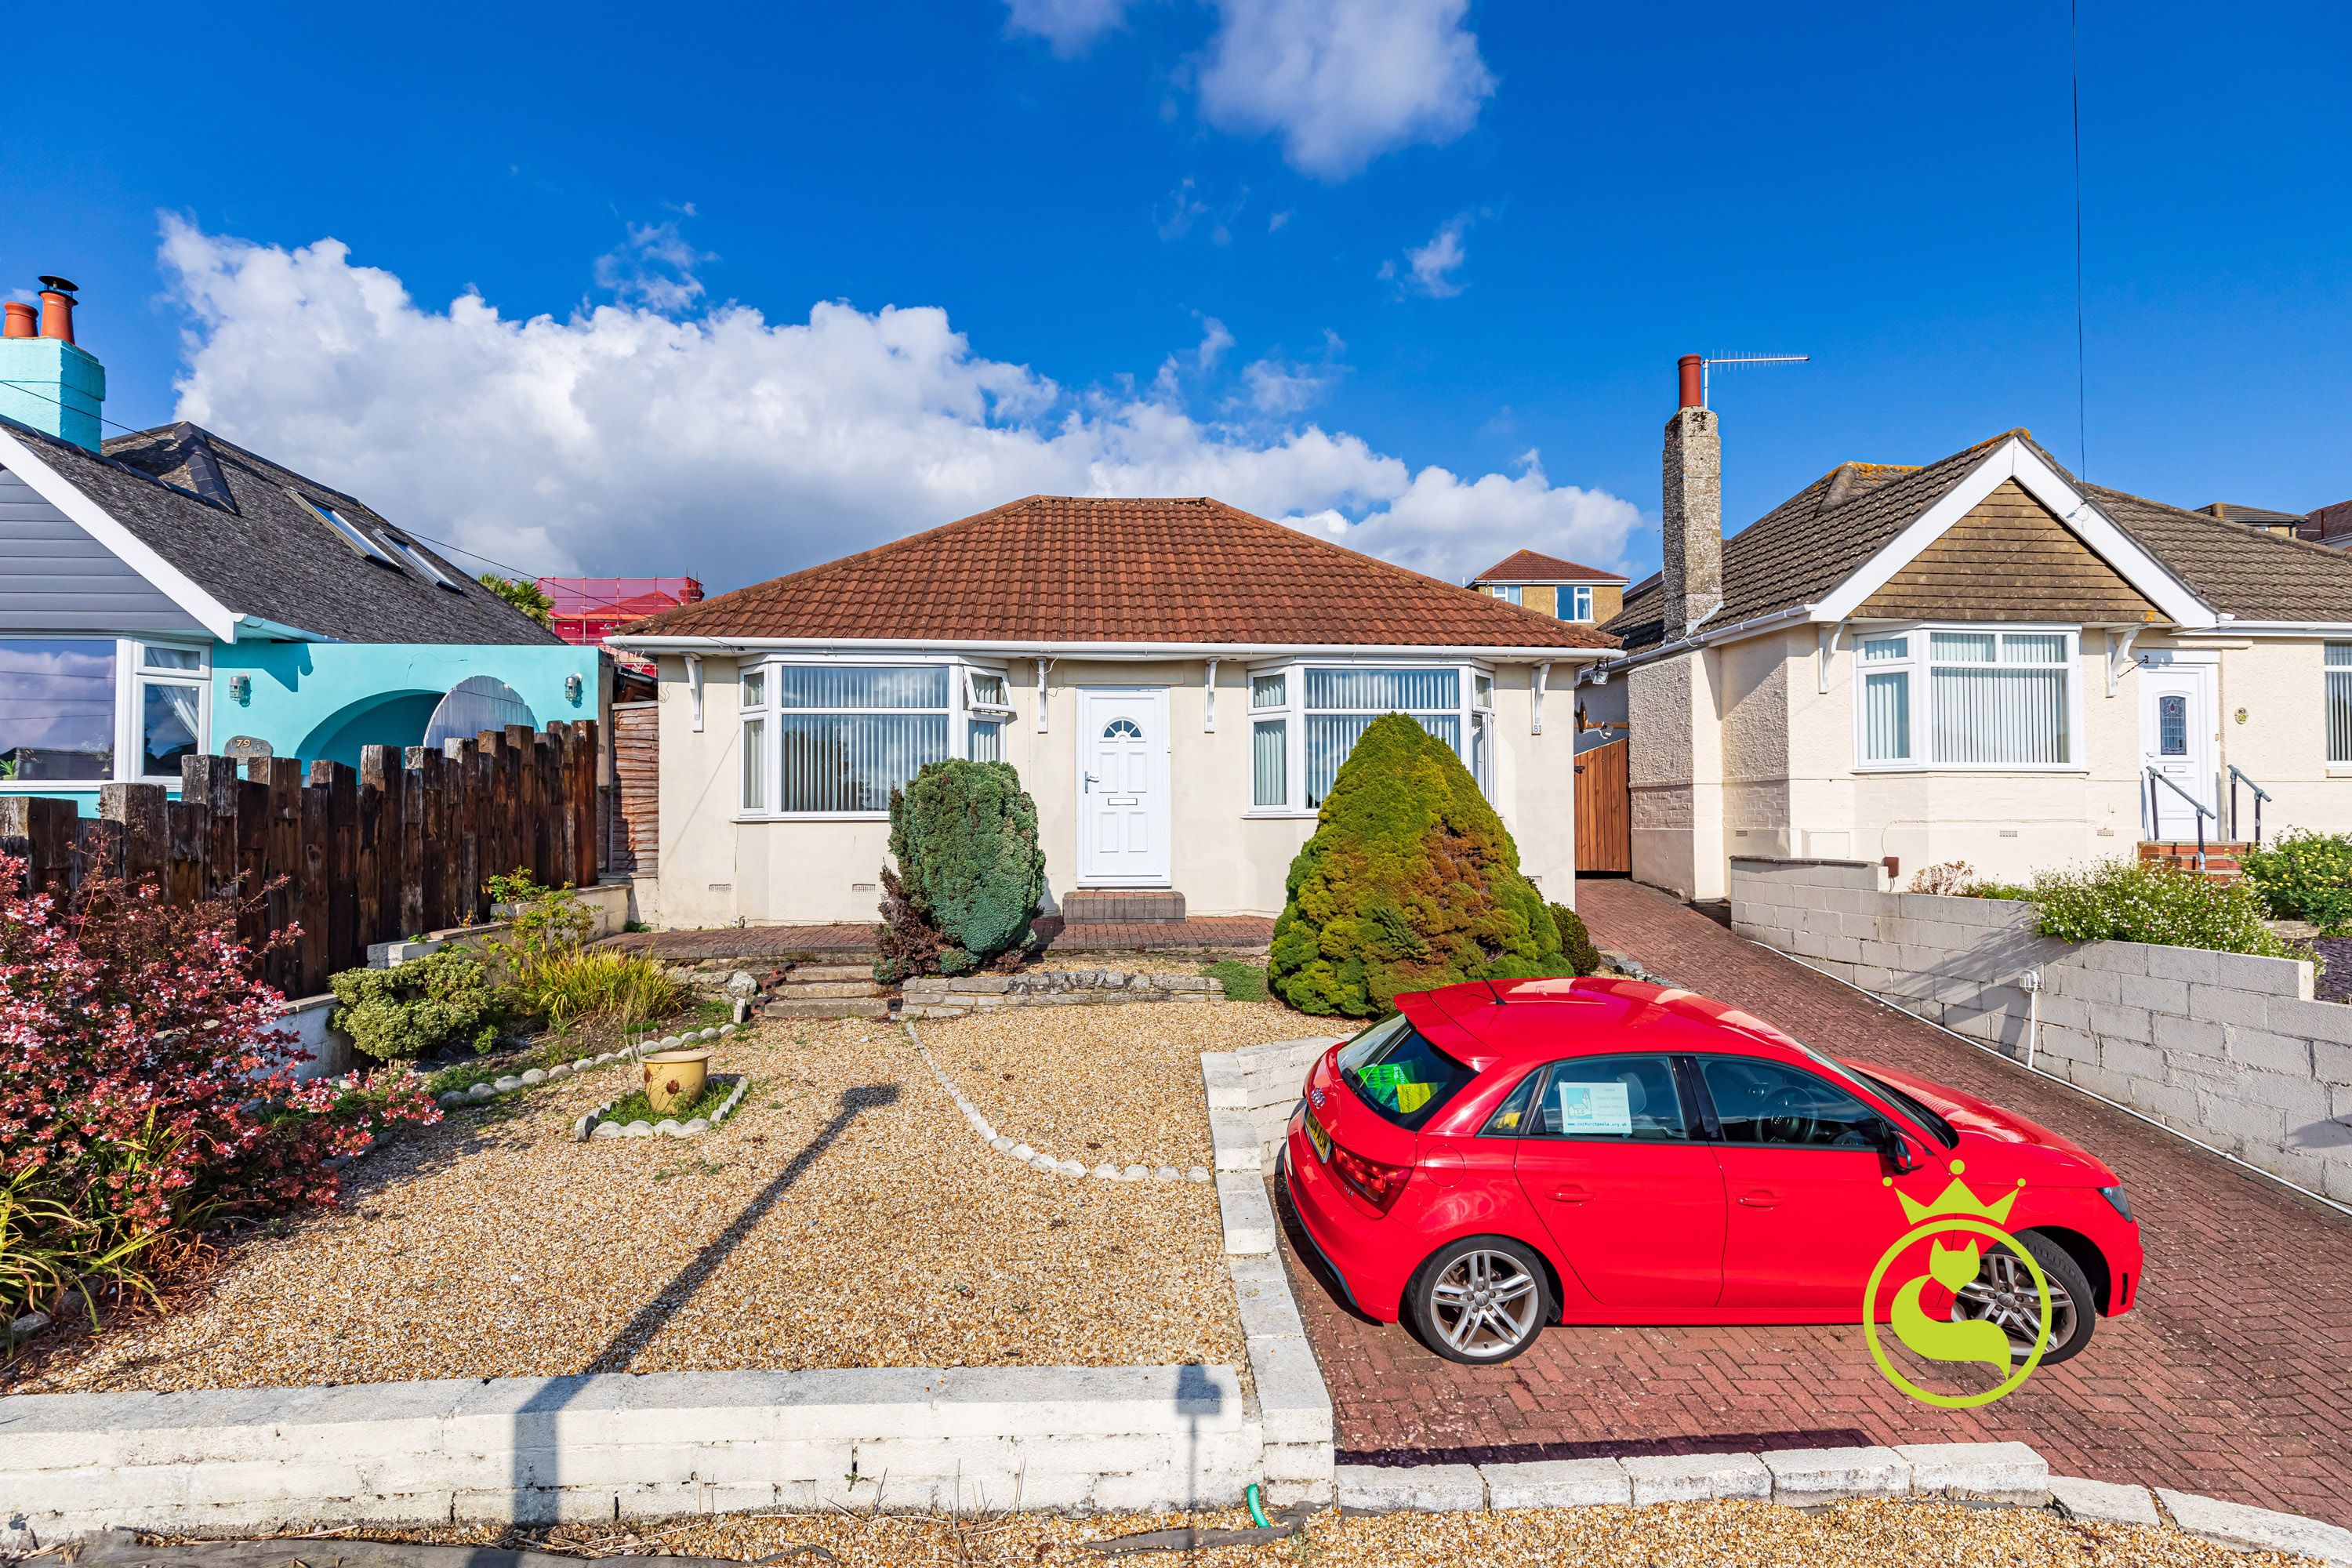 If you are looking for a good-sized bungalow in a quiet yet convenient location, then come and view this lovely two double bedroom property with plenty of potential to further improve.